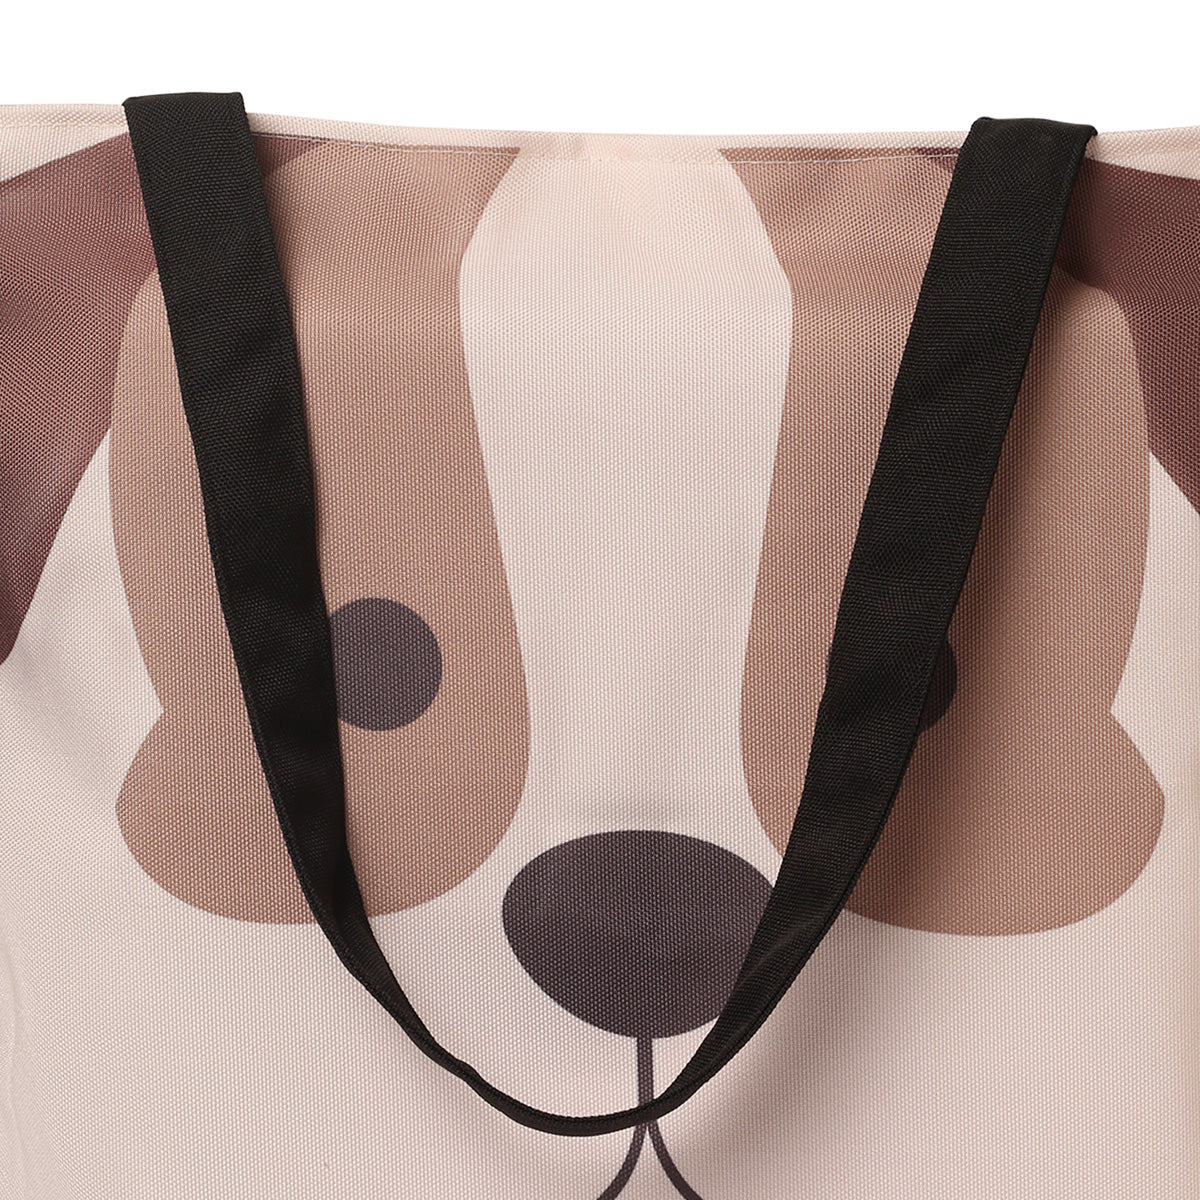 Chic tote bag showcasing a charming dog face print, a must-have for dog lovers.